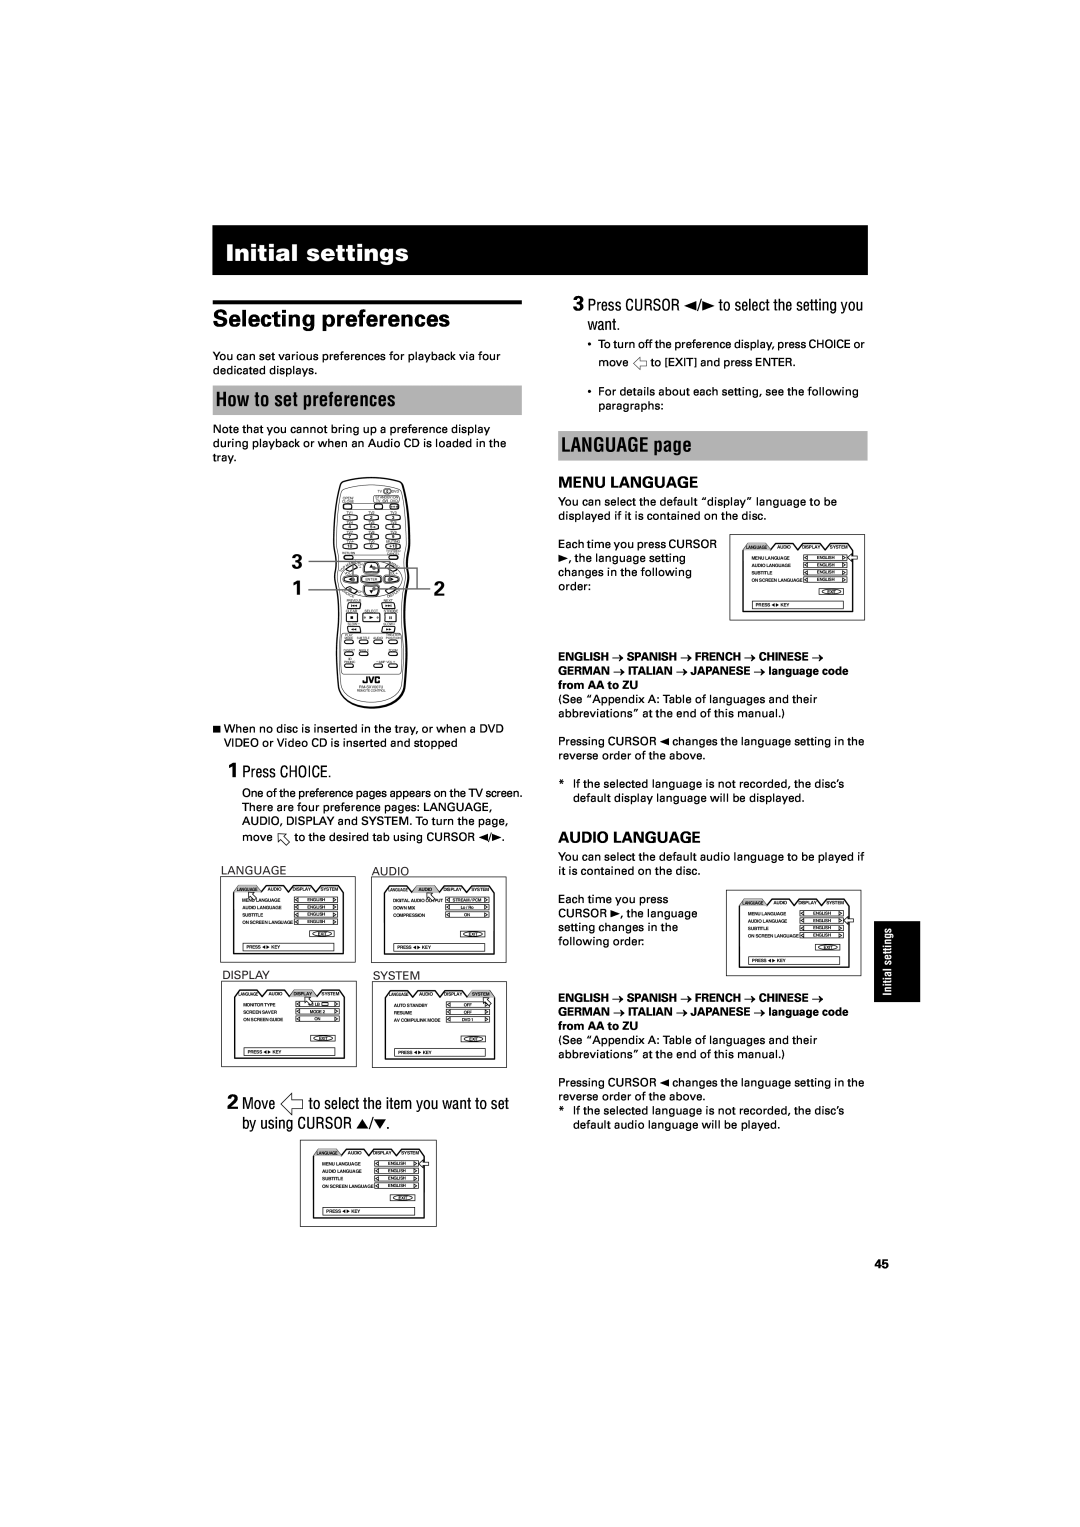 JVC GNT0013-014A Initial settings, Selecting preferences, How to set preferences, LANGUAGE page, Menu Language, order 